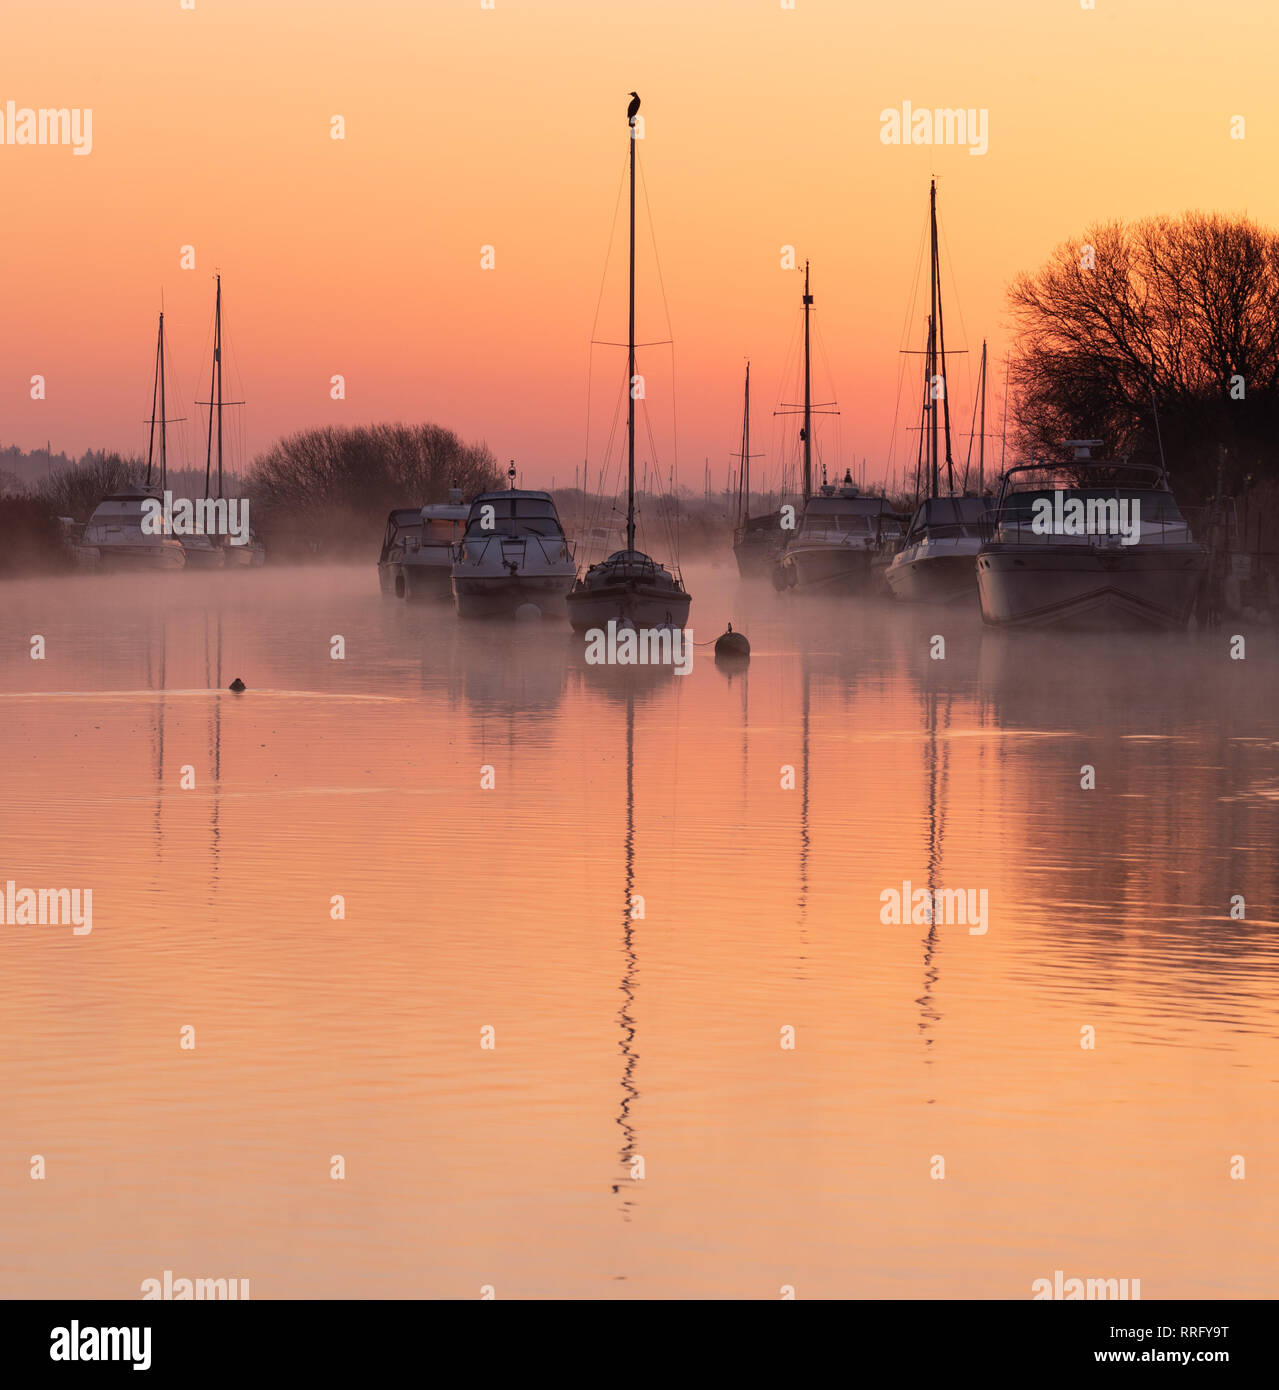 Wareham, Dorset, UK. 26th February 2019. UK Weather: The sky glows with orange and pink hues as the mist rises over the River Frome on a crisp, chilly February morning. A tranquil scene as sailing boats moored along the river bank are reflected in the calm water on the start of what is set to be another gloriously sunny day.  Credit: Celia McMahon/Alamy Live News Stock Photo